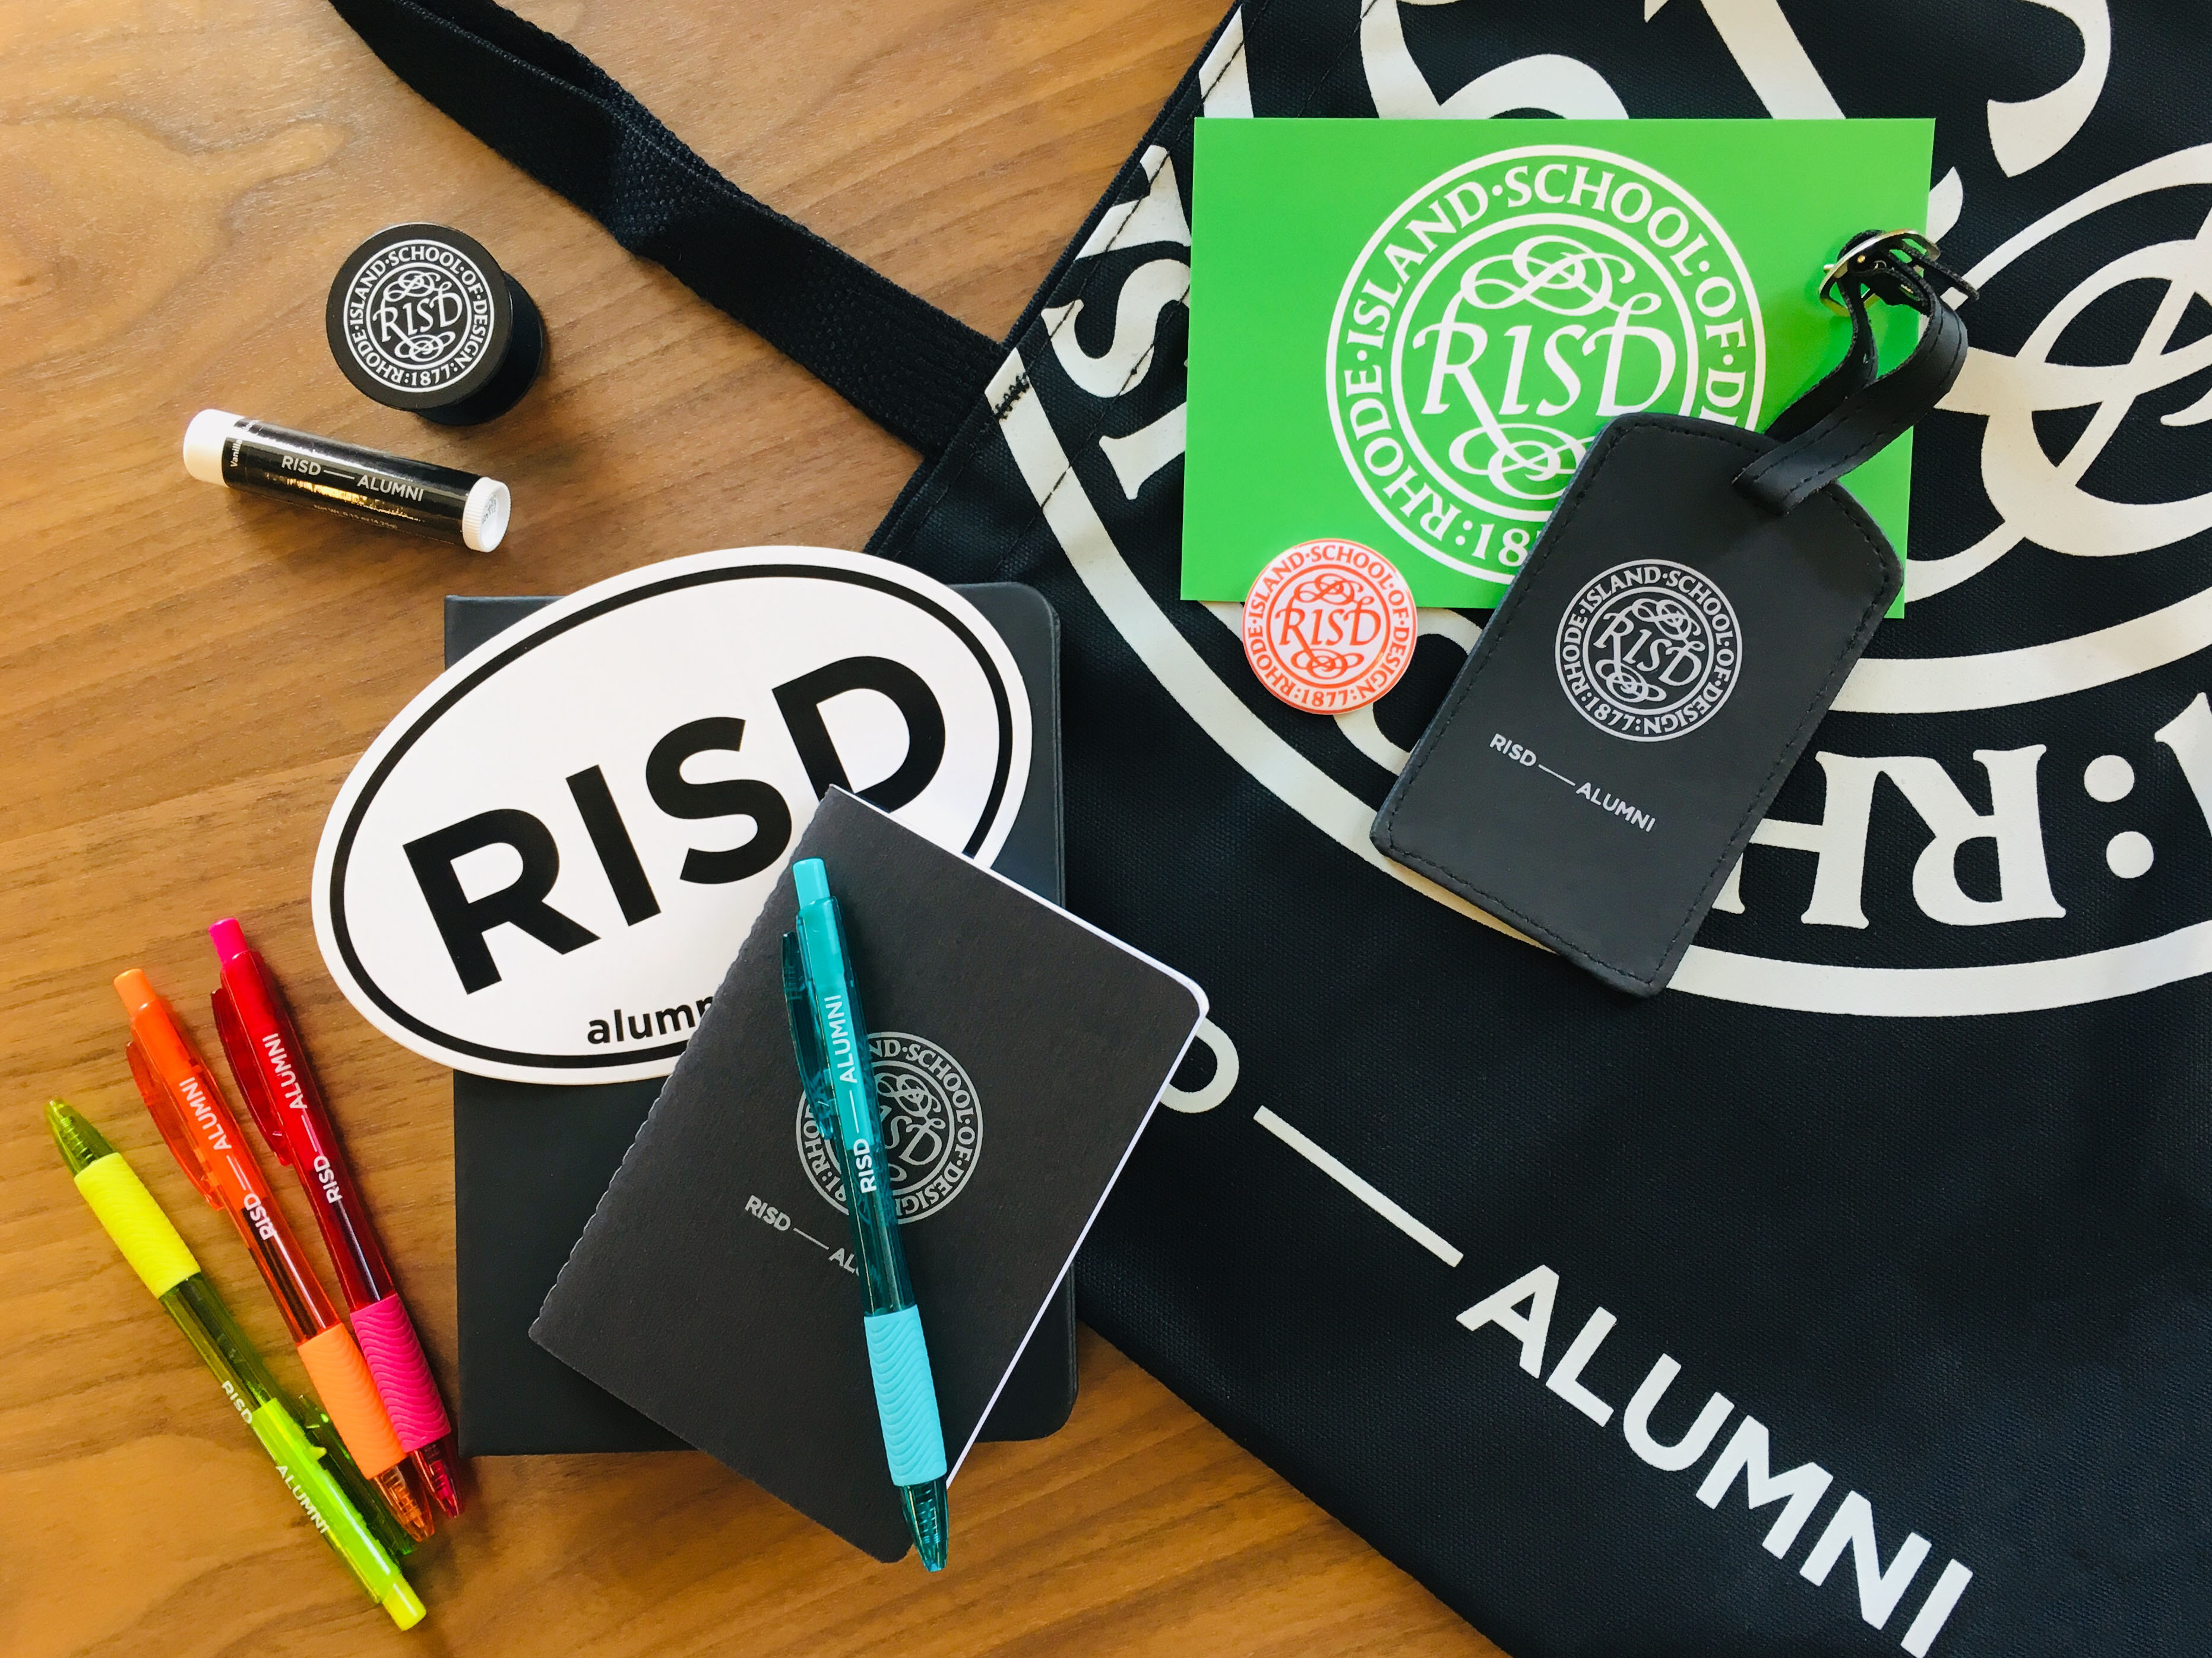 Photo of RISD swag on a table: pens, buttons, totebag, luggage tag, etc.